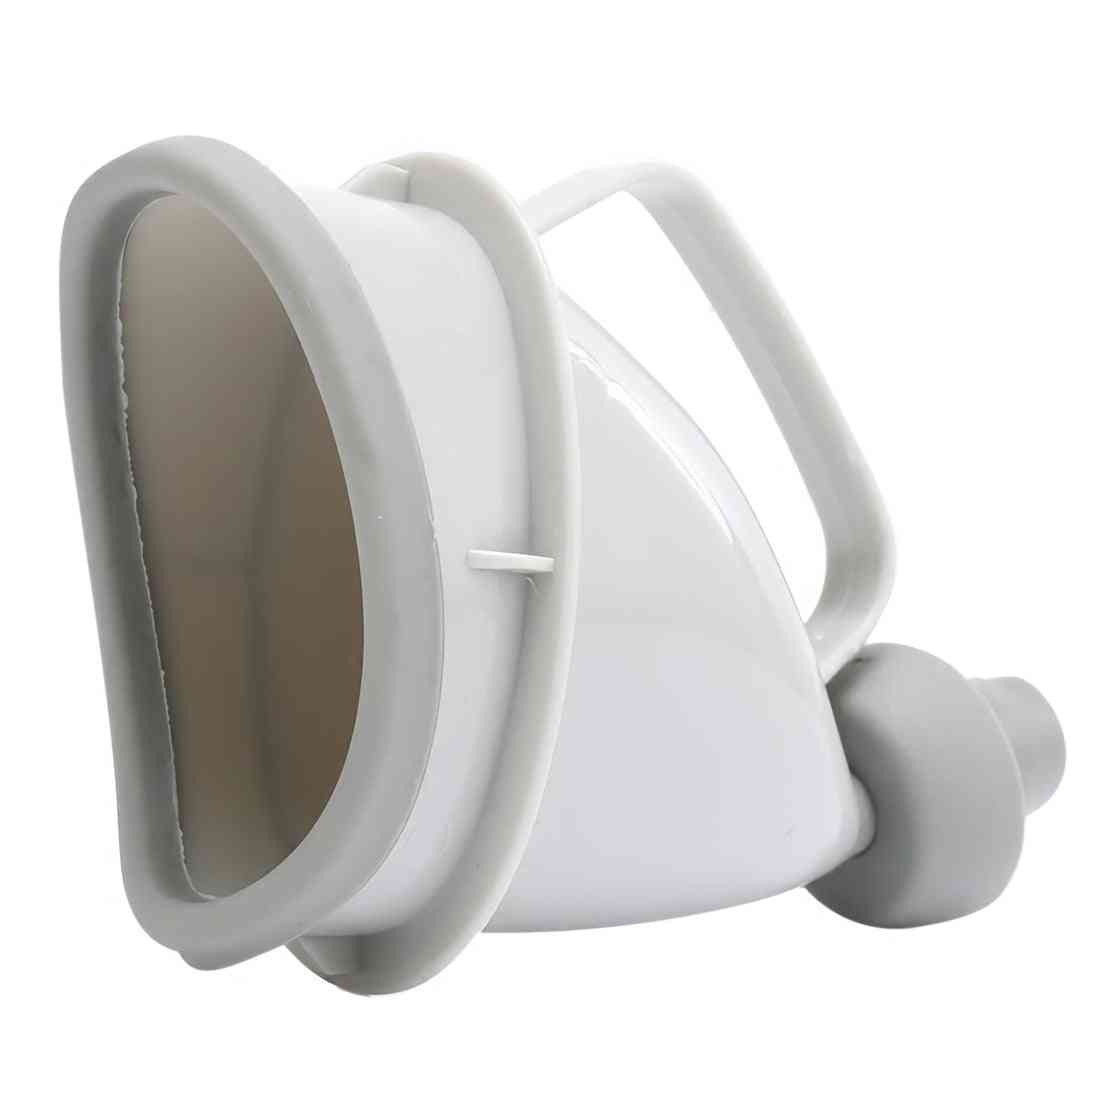 Portable Reusable Female Urinal Funnel For Travel - Sit Or Stand Emergency